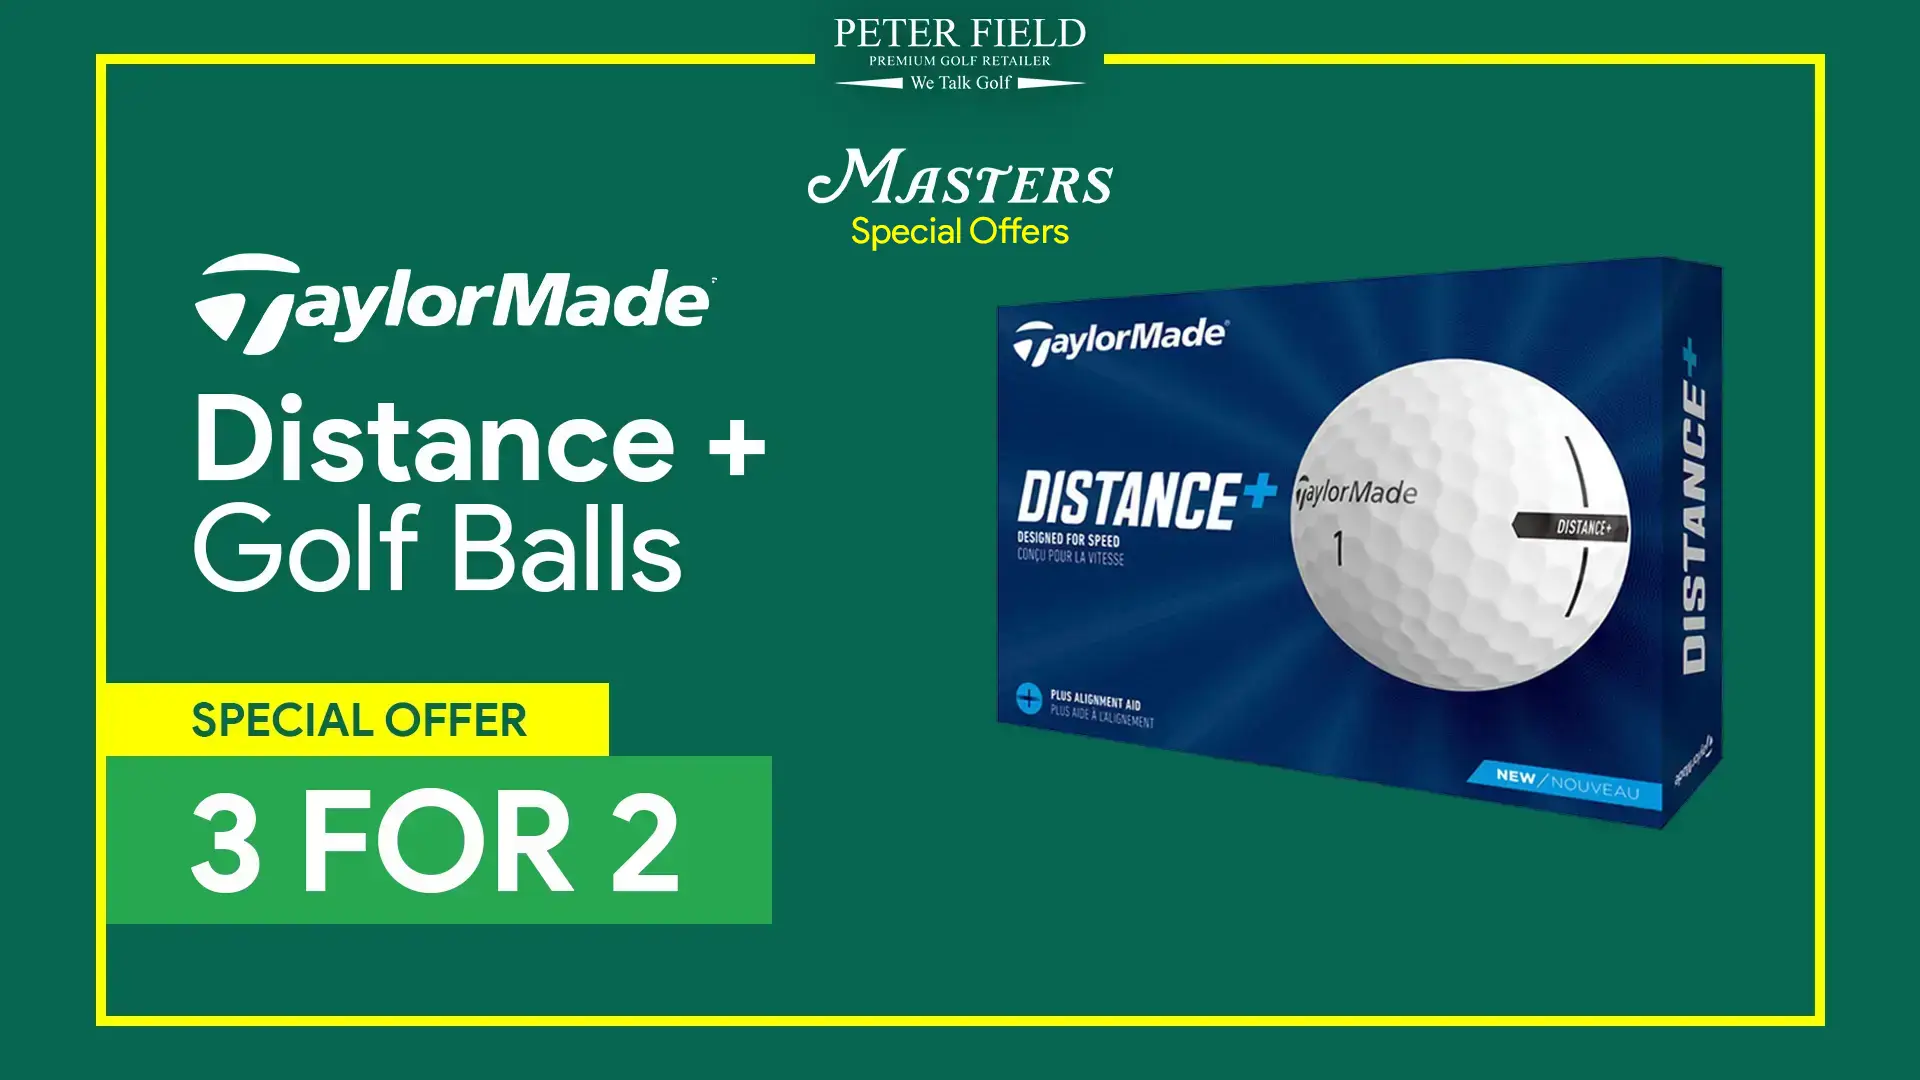 3 for 2 on TaylorMade Distance + Golf Balls